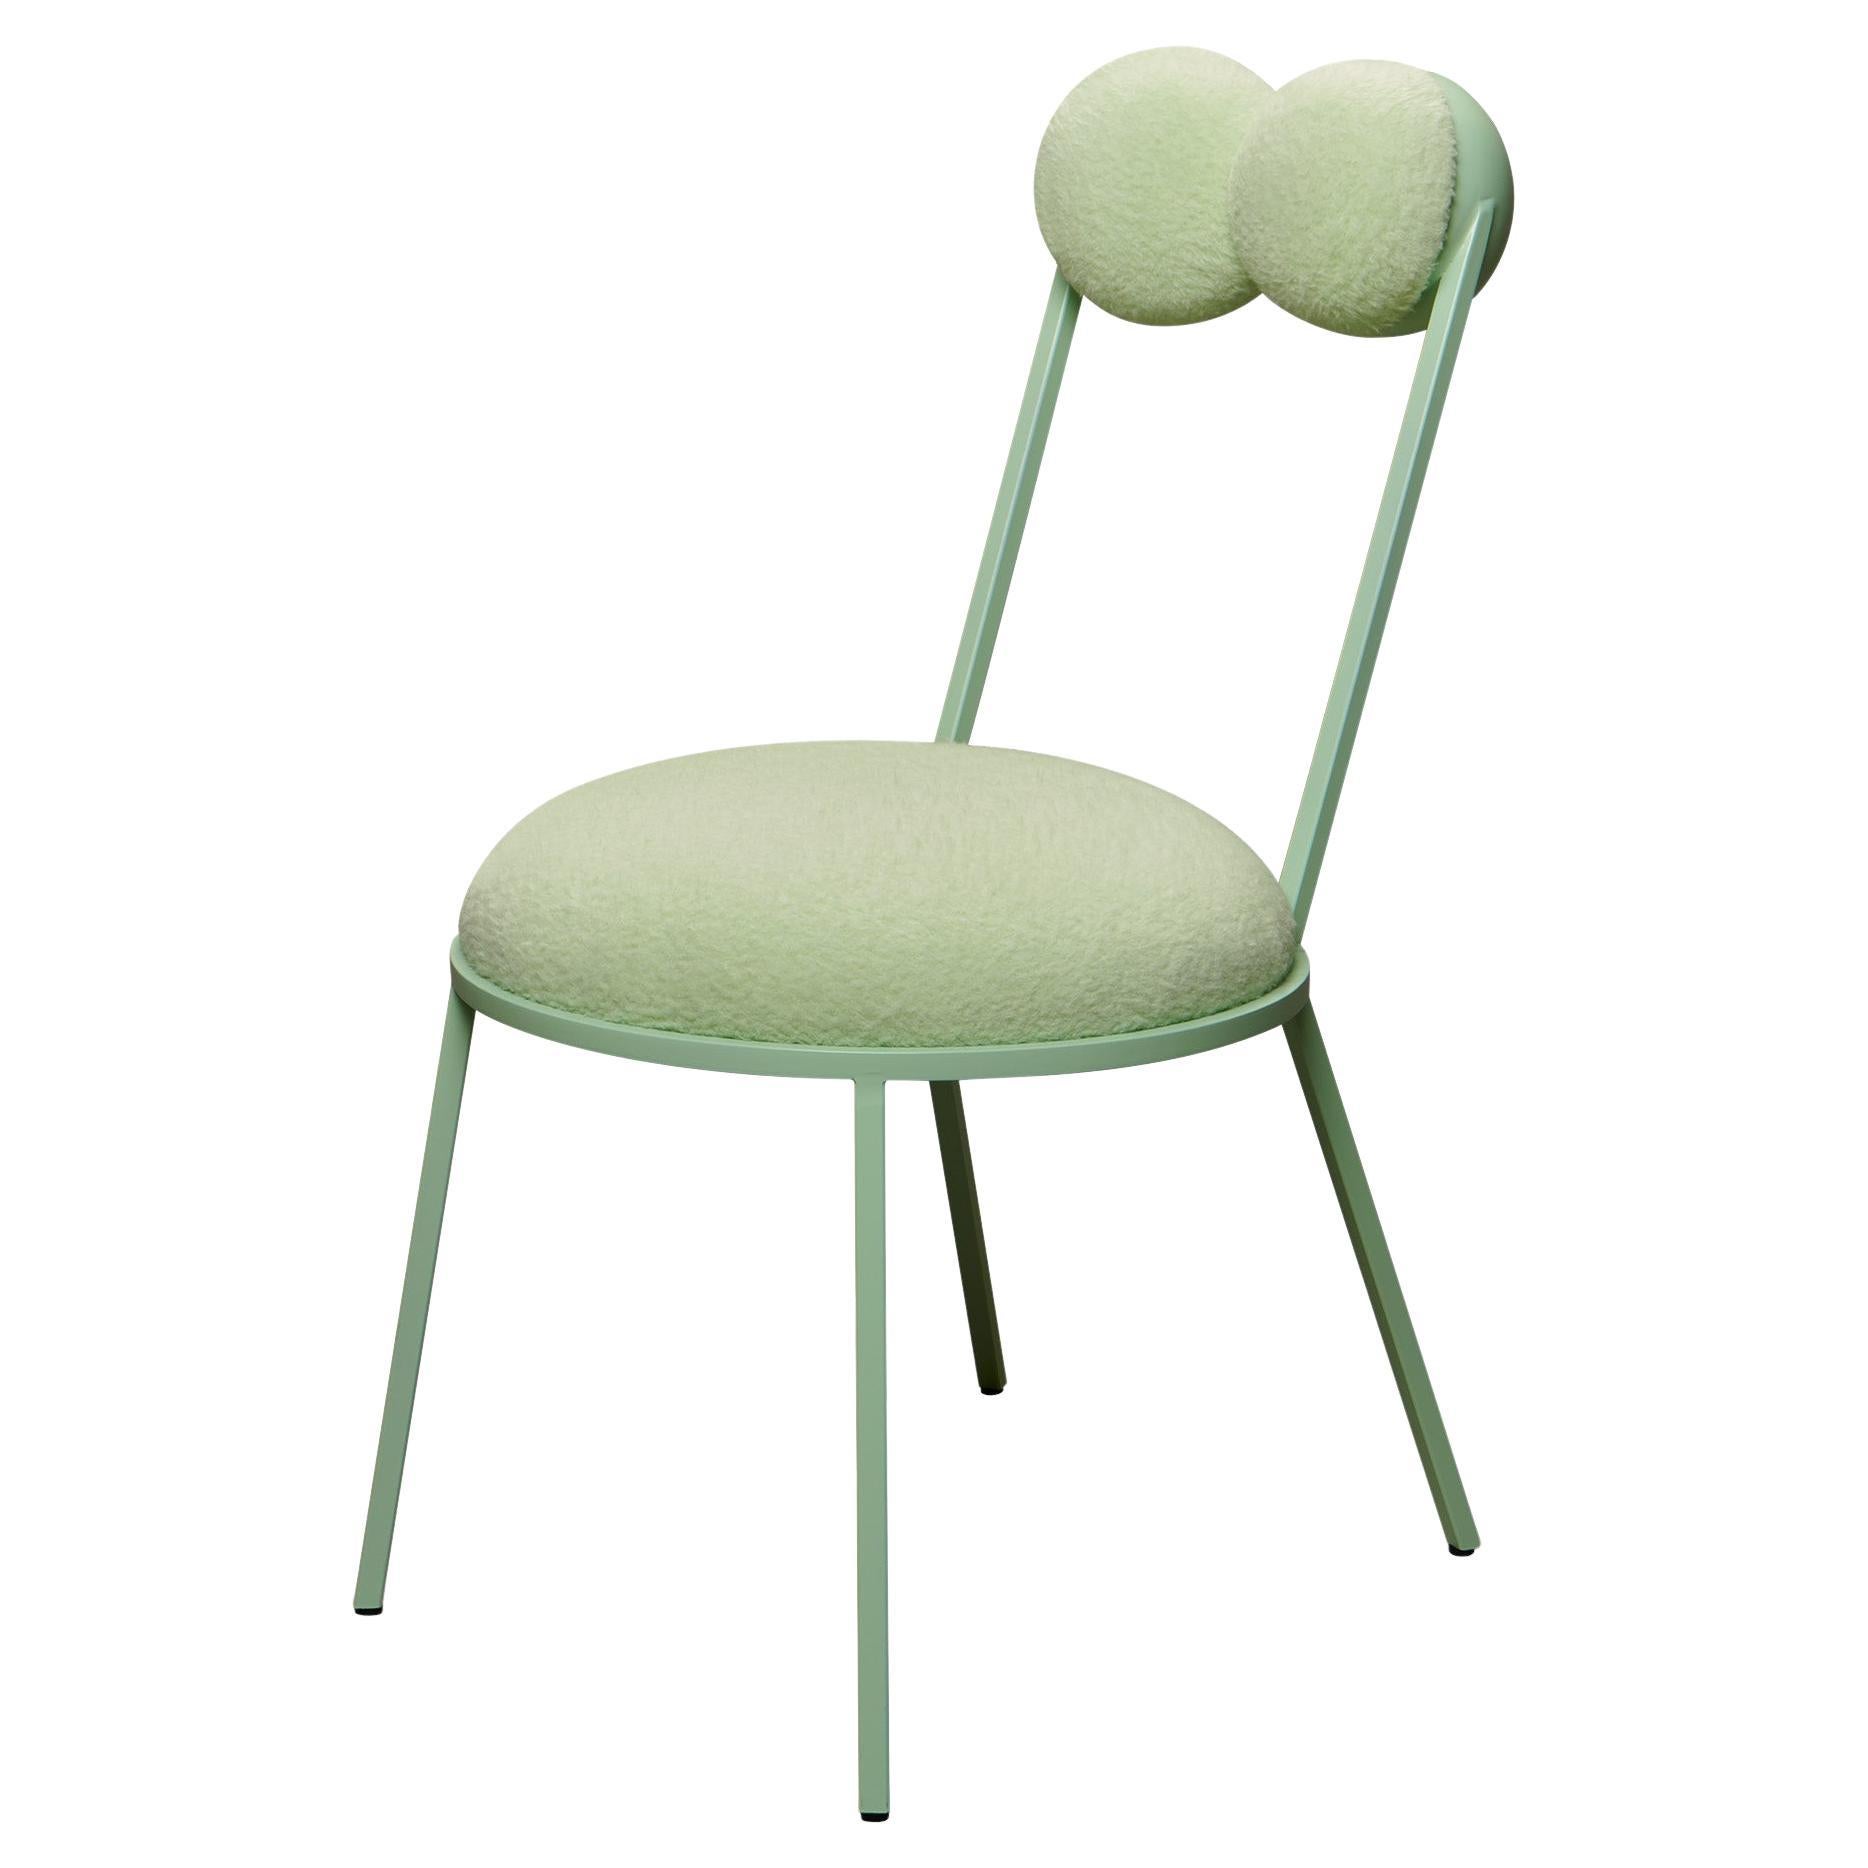 Trevor Sculptural Dining Chair Mint Green Frame and Wool by Lara Bohinc  For Sale